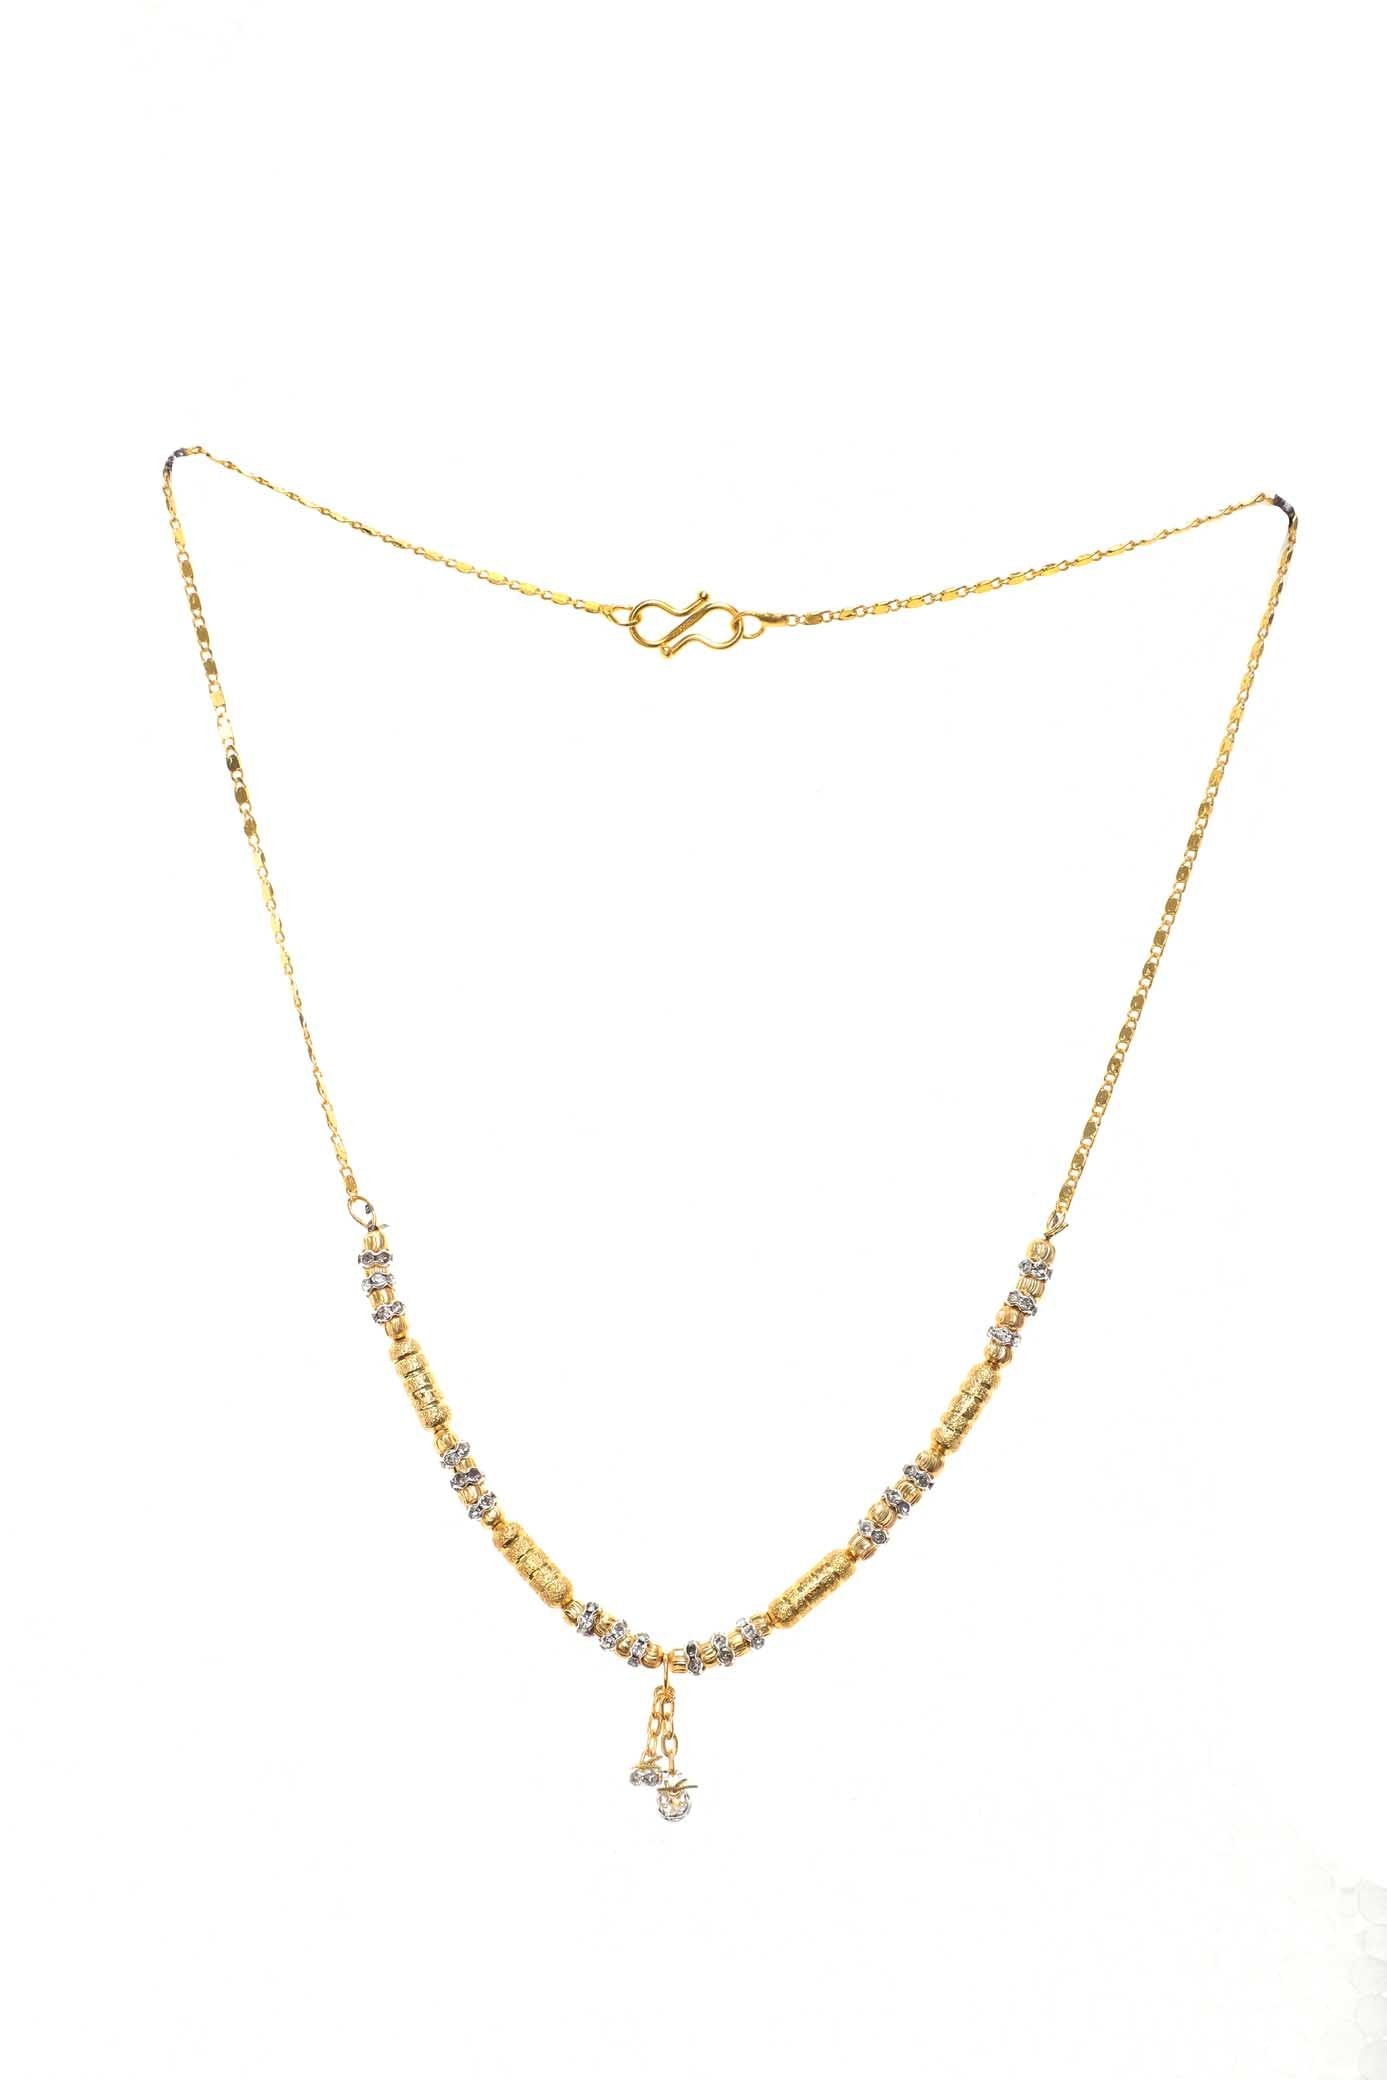 Indian Jewellery from Meira Jewellery:Chain Necklace,Trendy Golden Chain Necklace MJ-DOK-HD-07AG